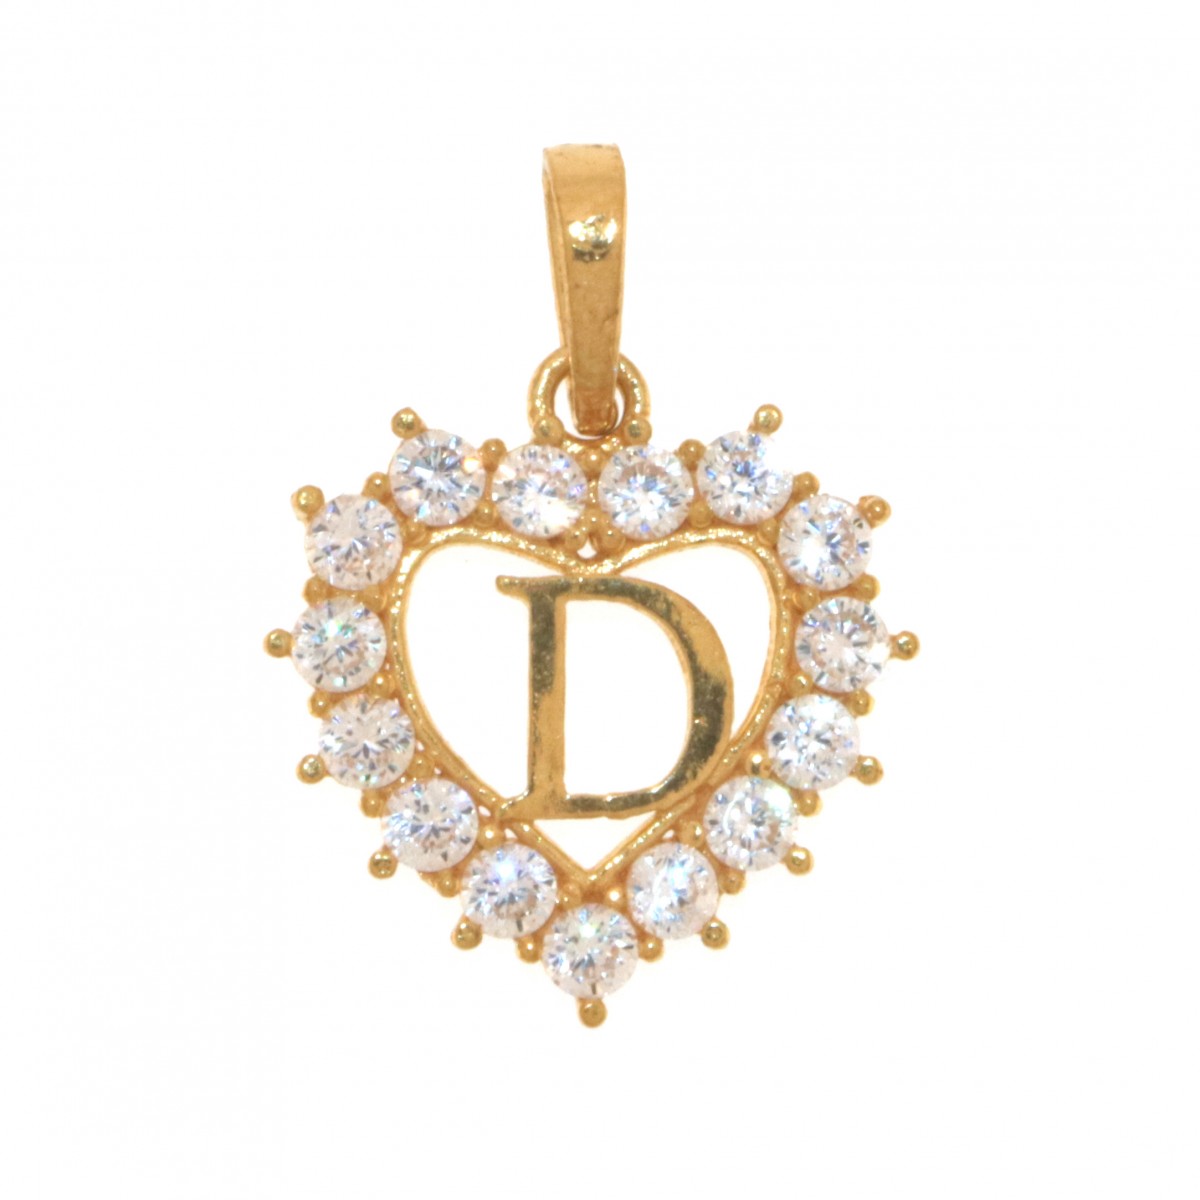 22ct Real Gold Asian/Indian/Pakistani Style Heart 'D' Pendant